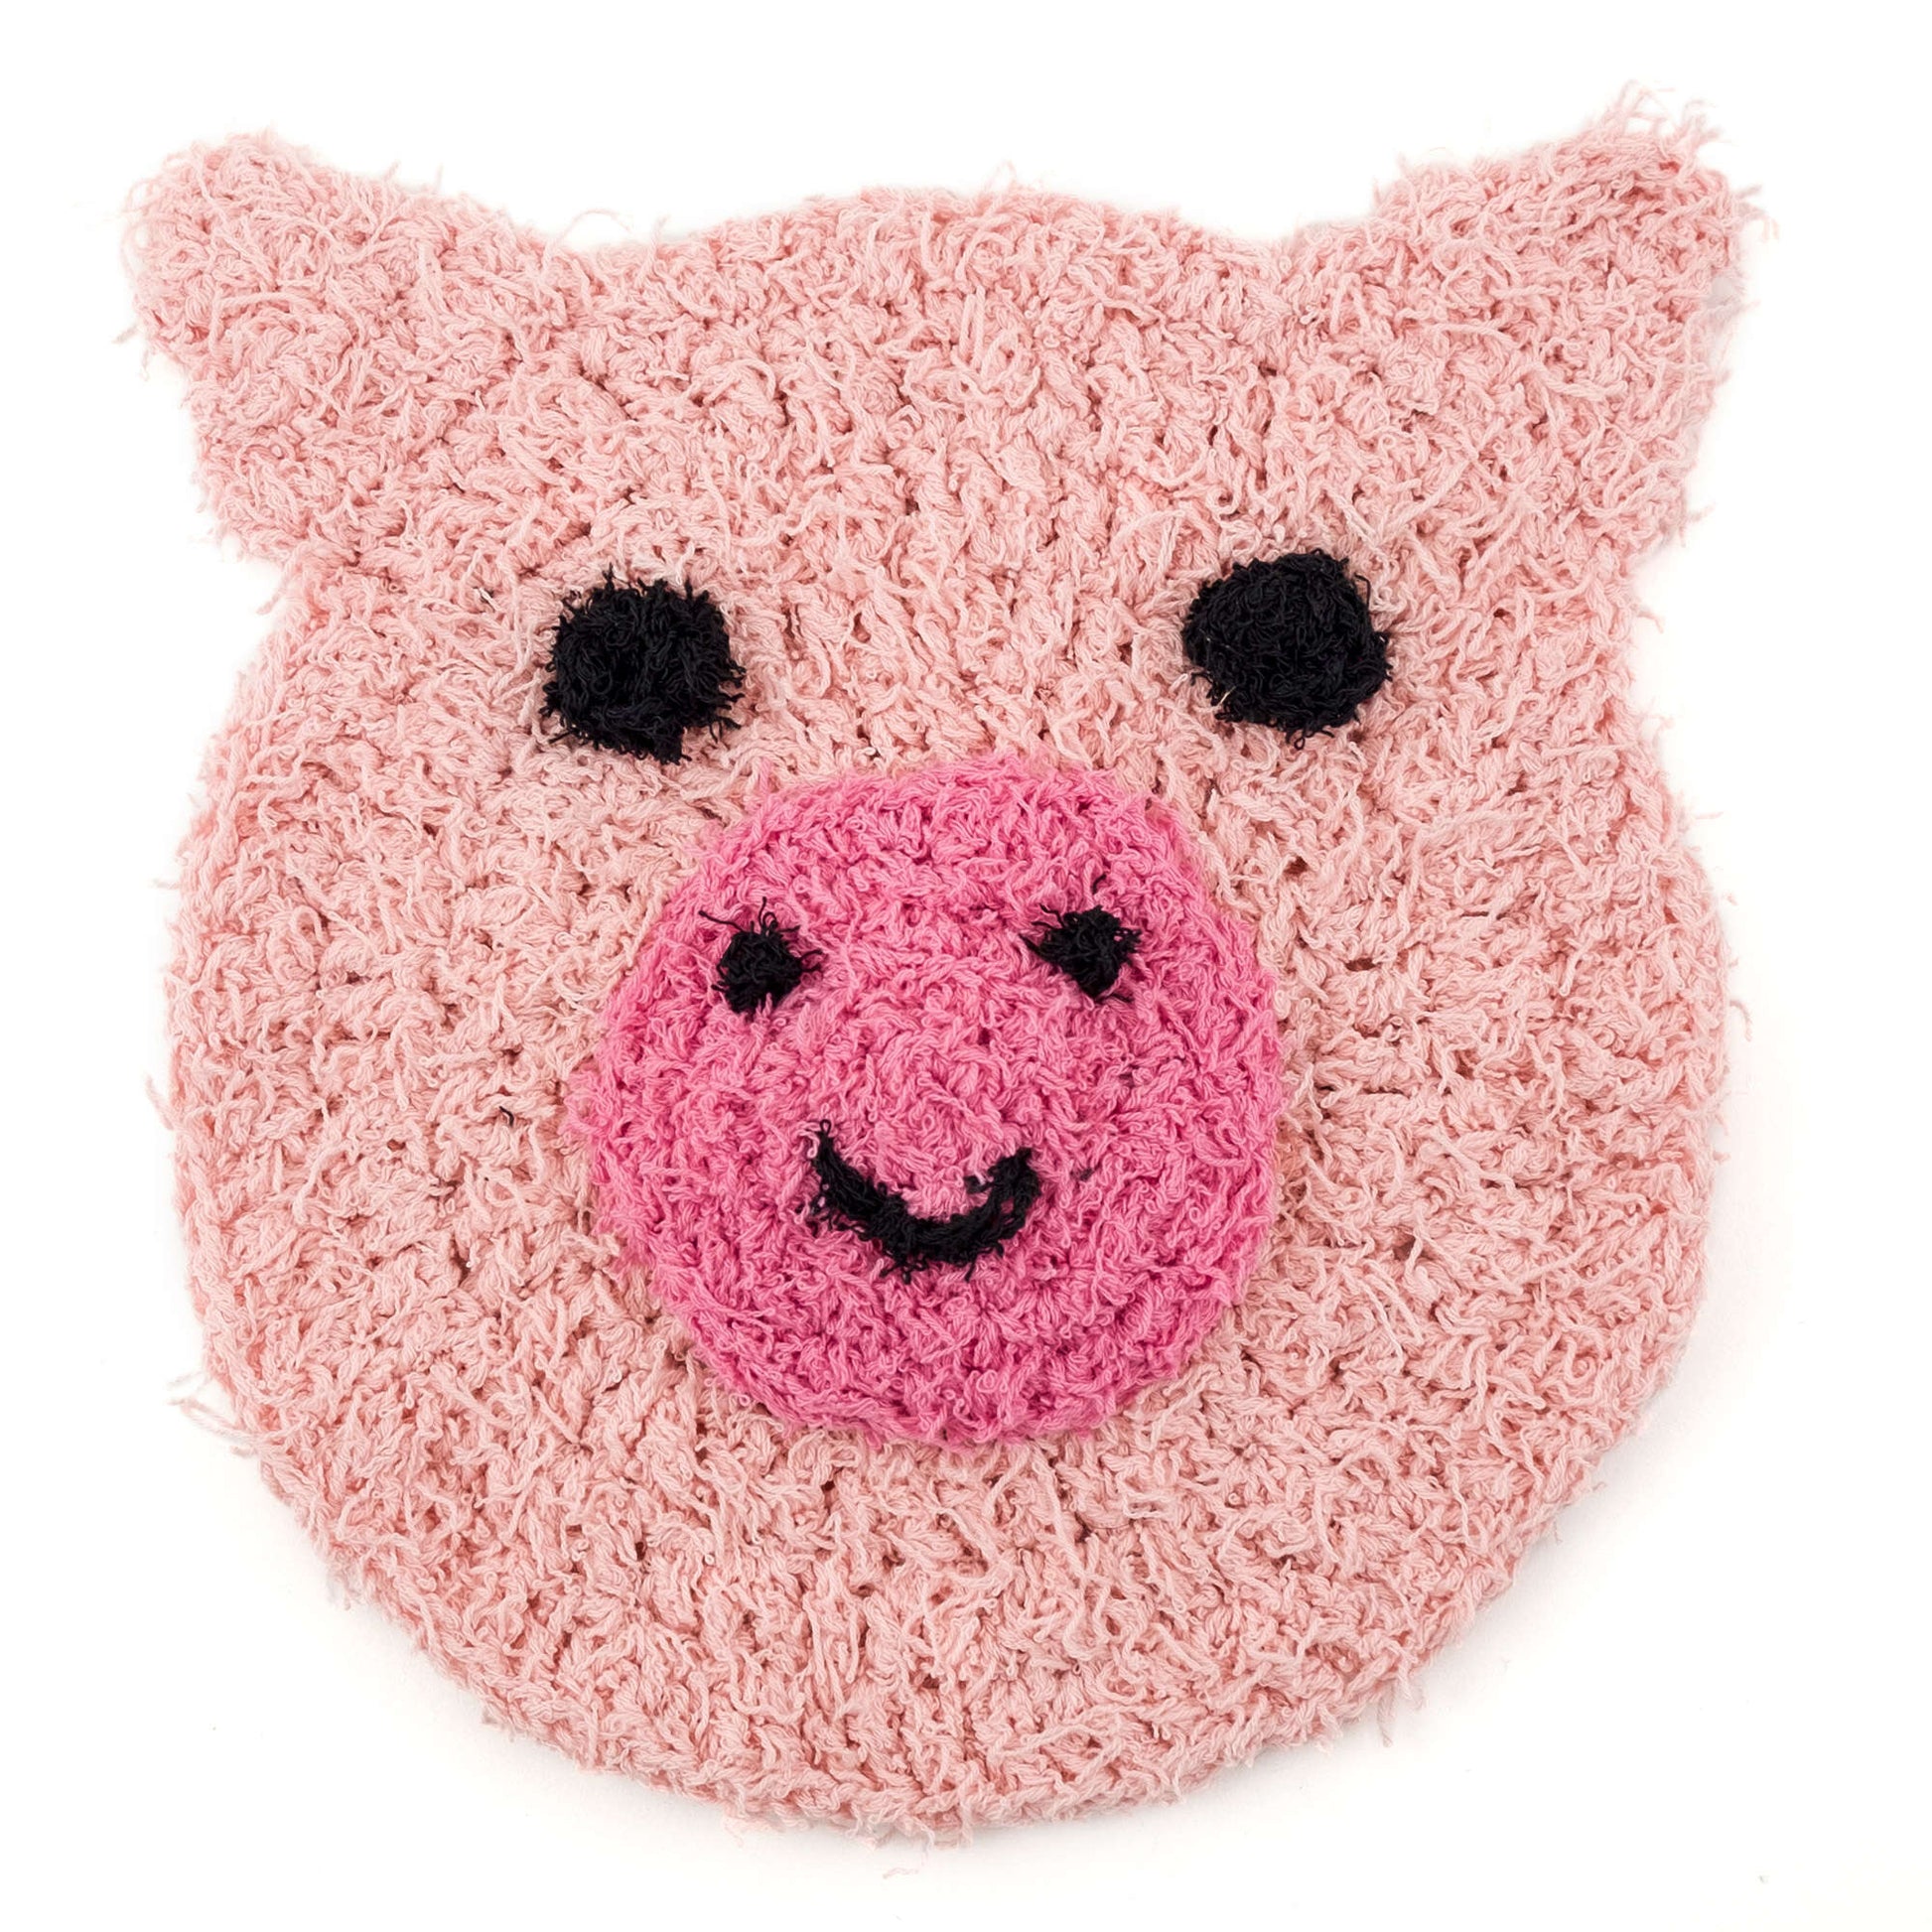 Free Red Heart Playful Pig Scrubby Pattern